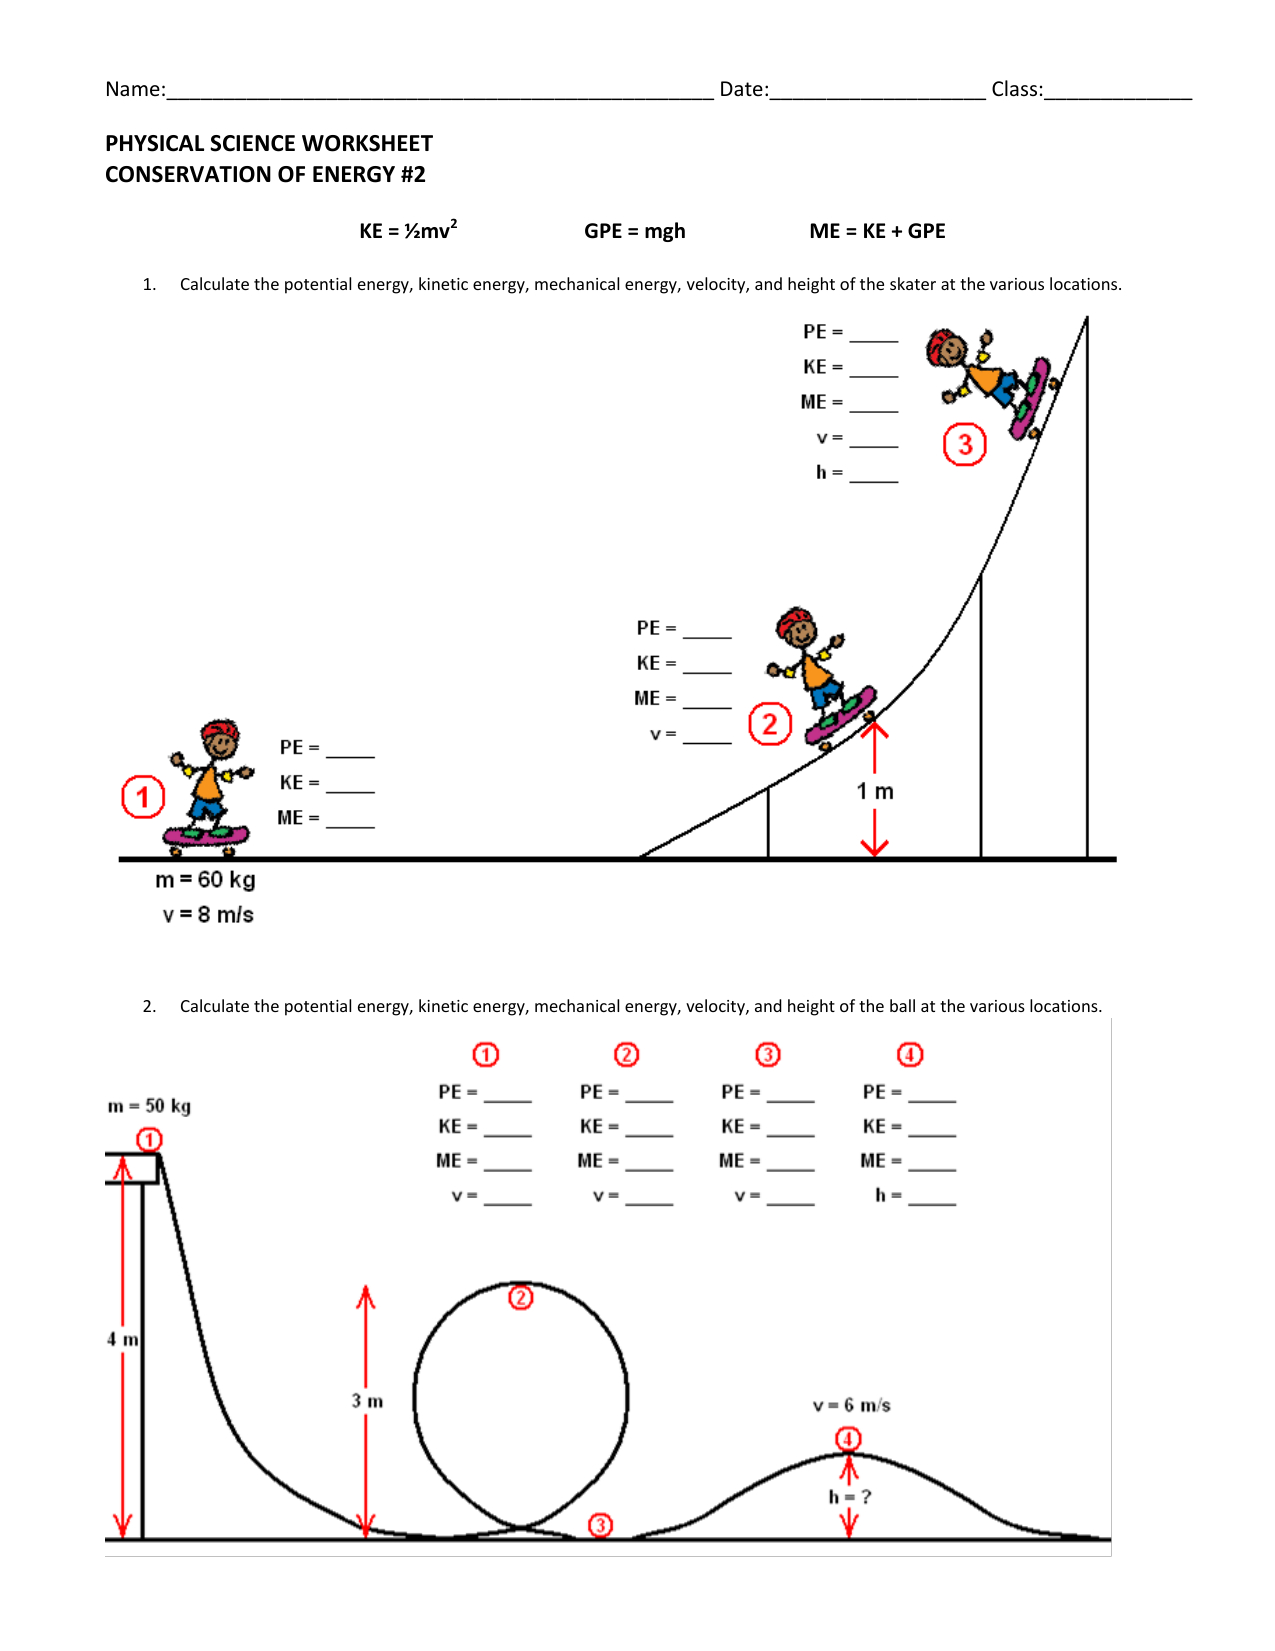 Physical Science Worksheet Conservation Of Energy 2 — db-excel.com